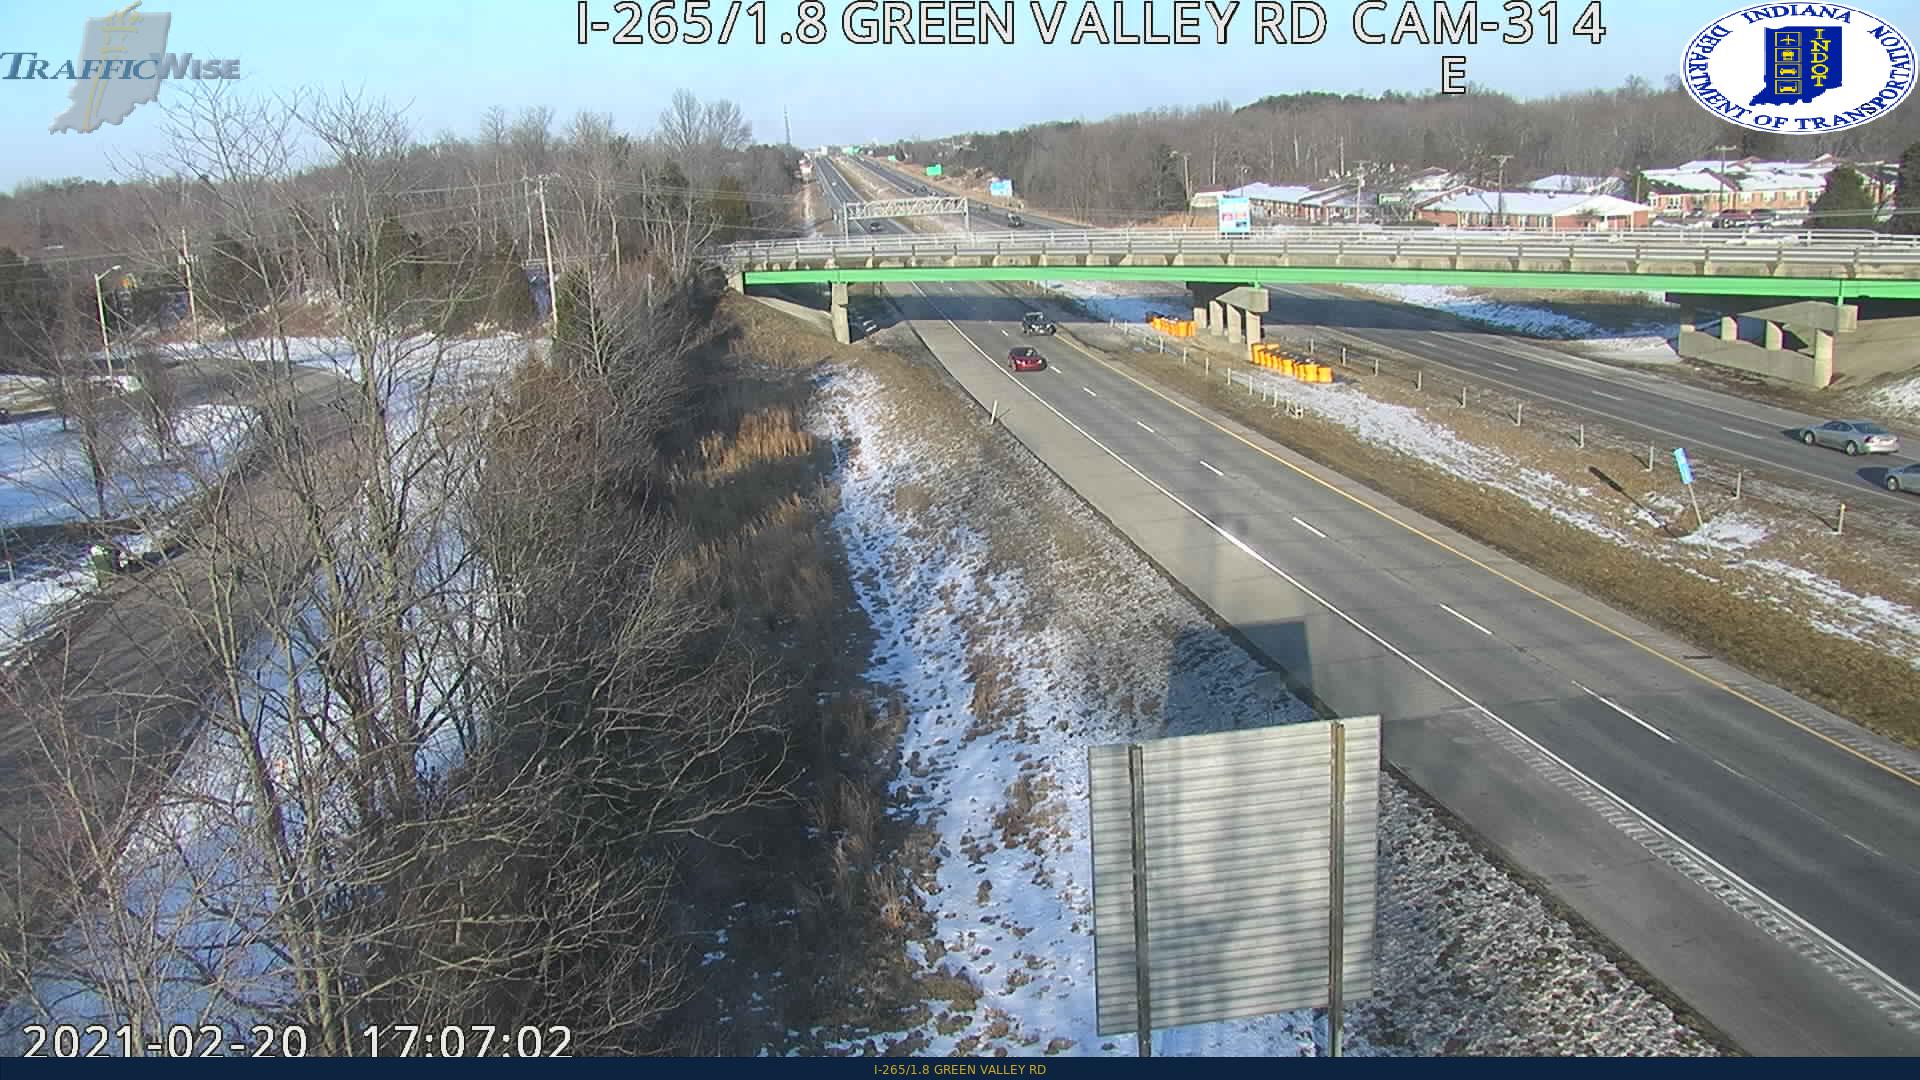 I-265/1.8 GREEN VALLEY RD (251) () - USA